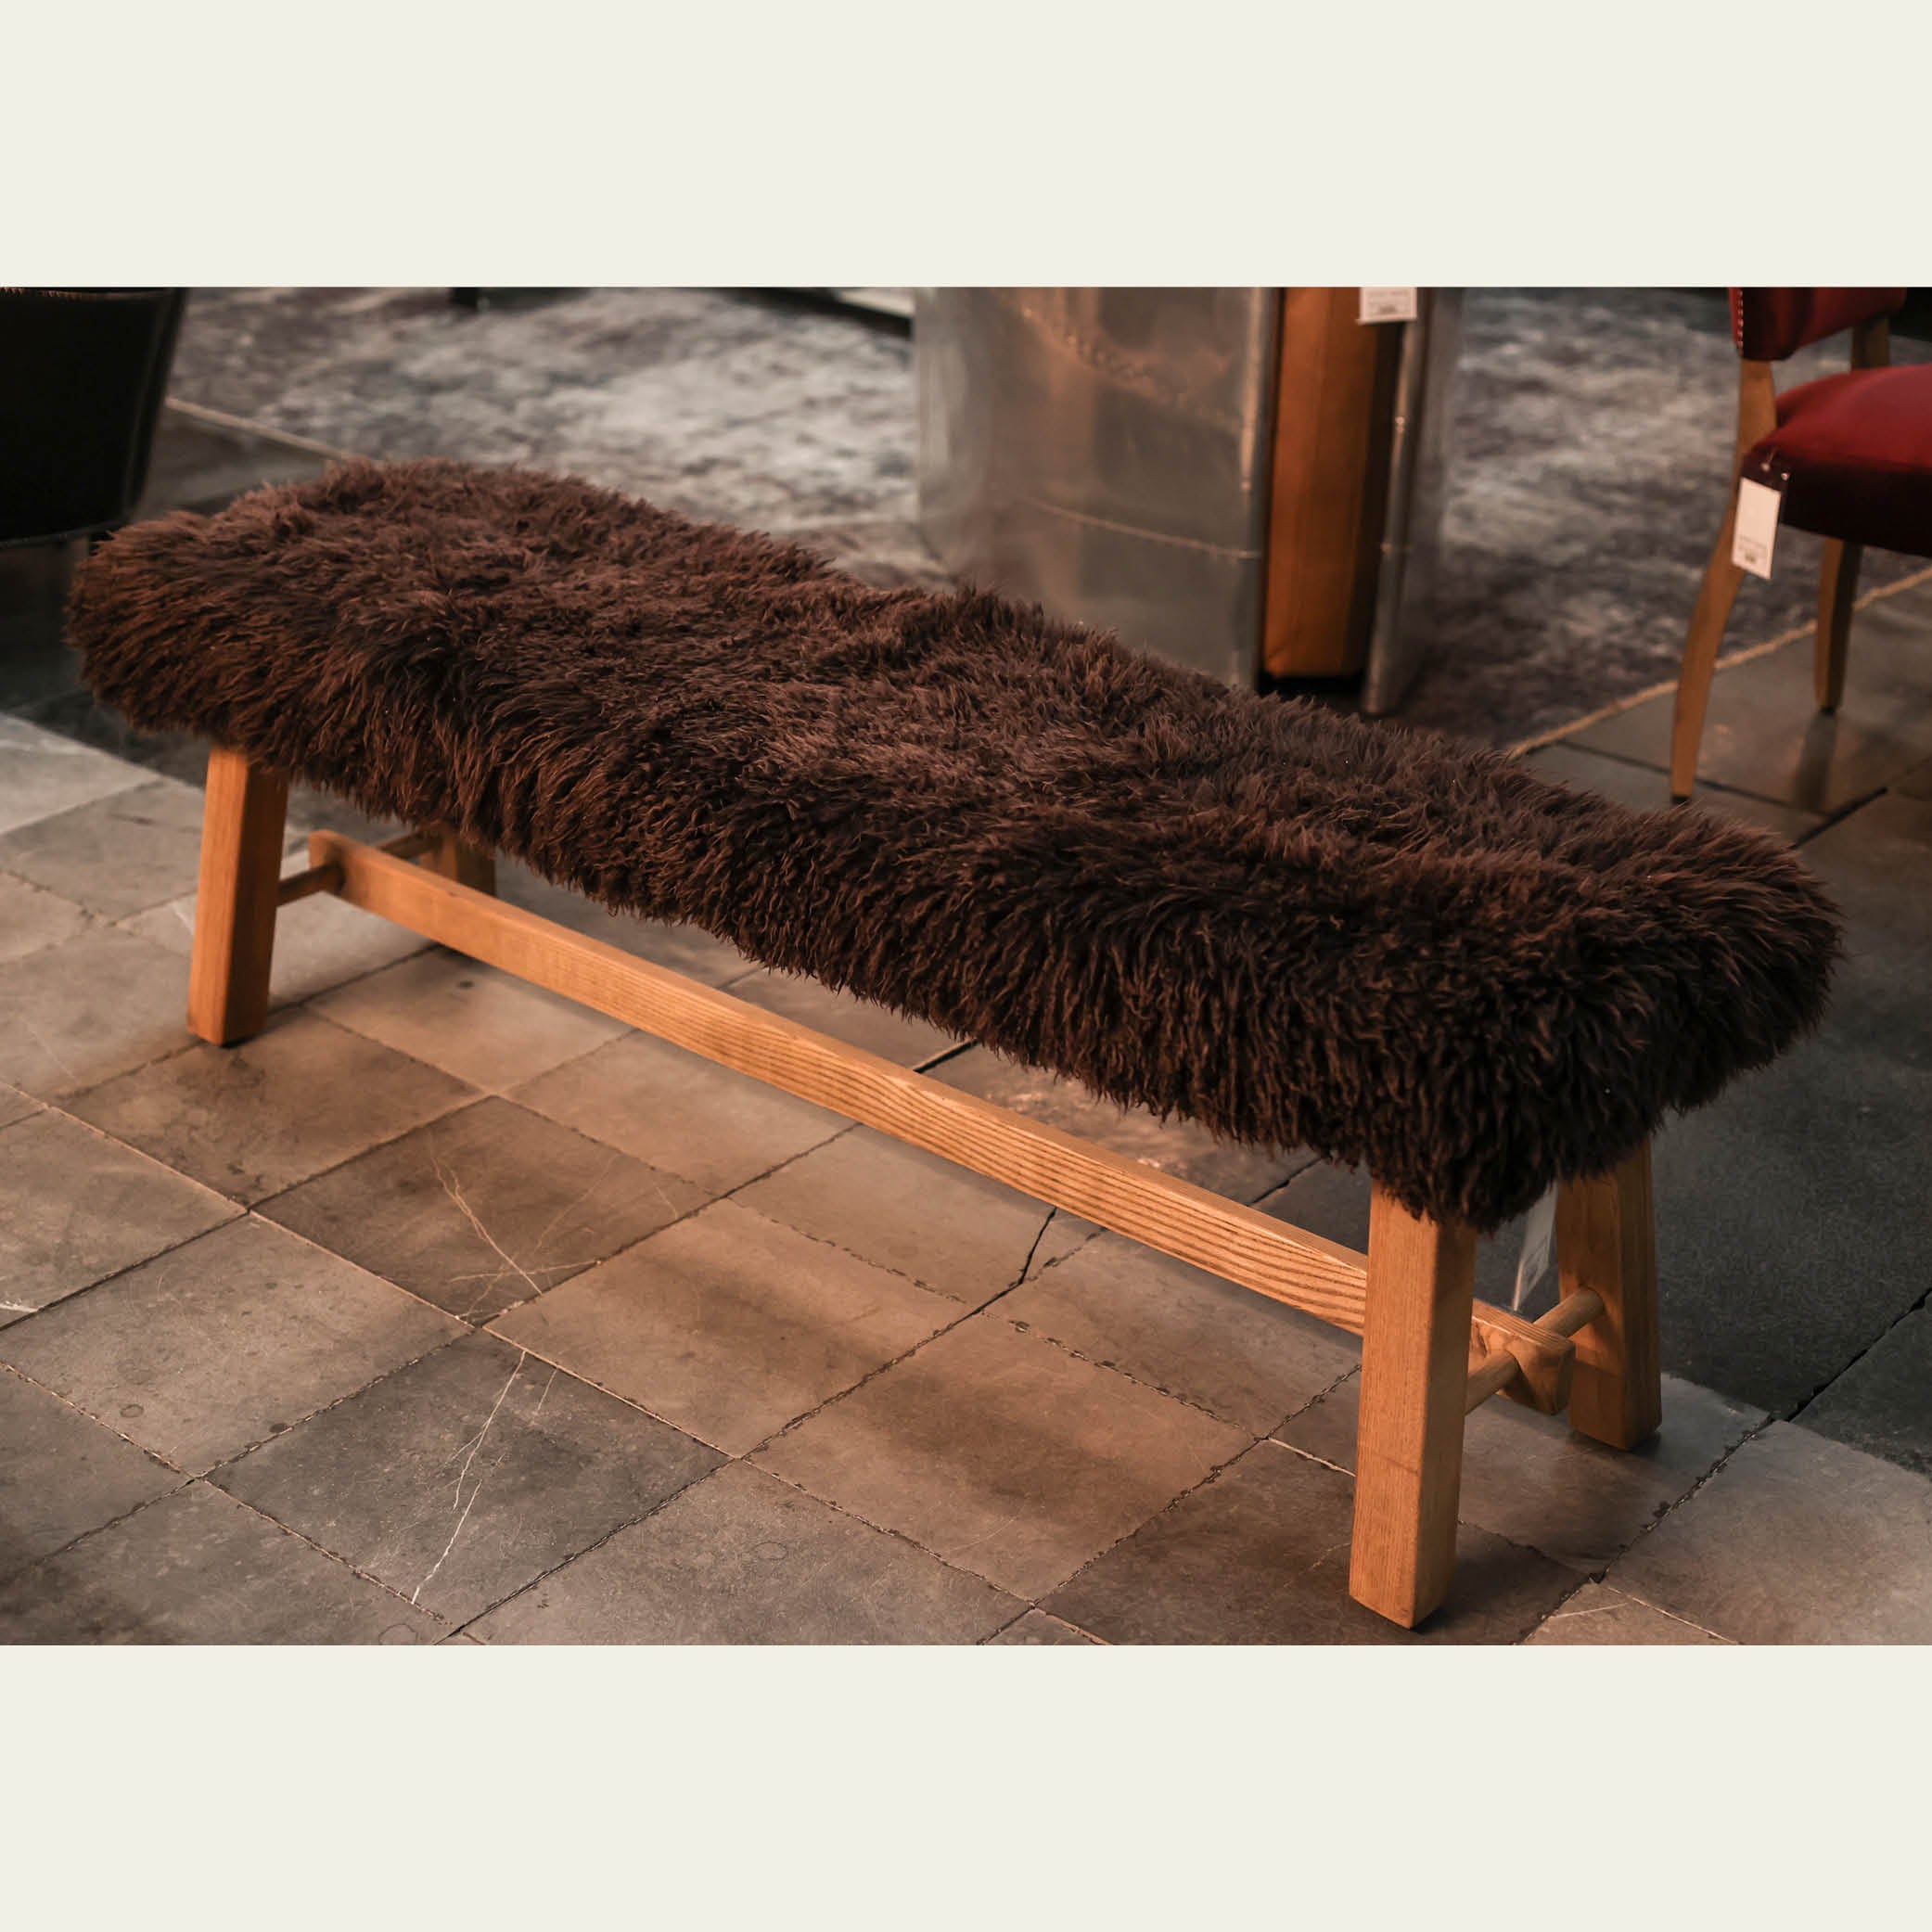 EXPO Timothy Oulton CABIN bench seat